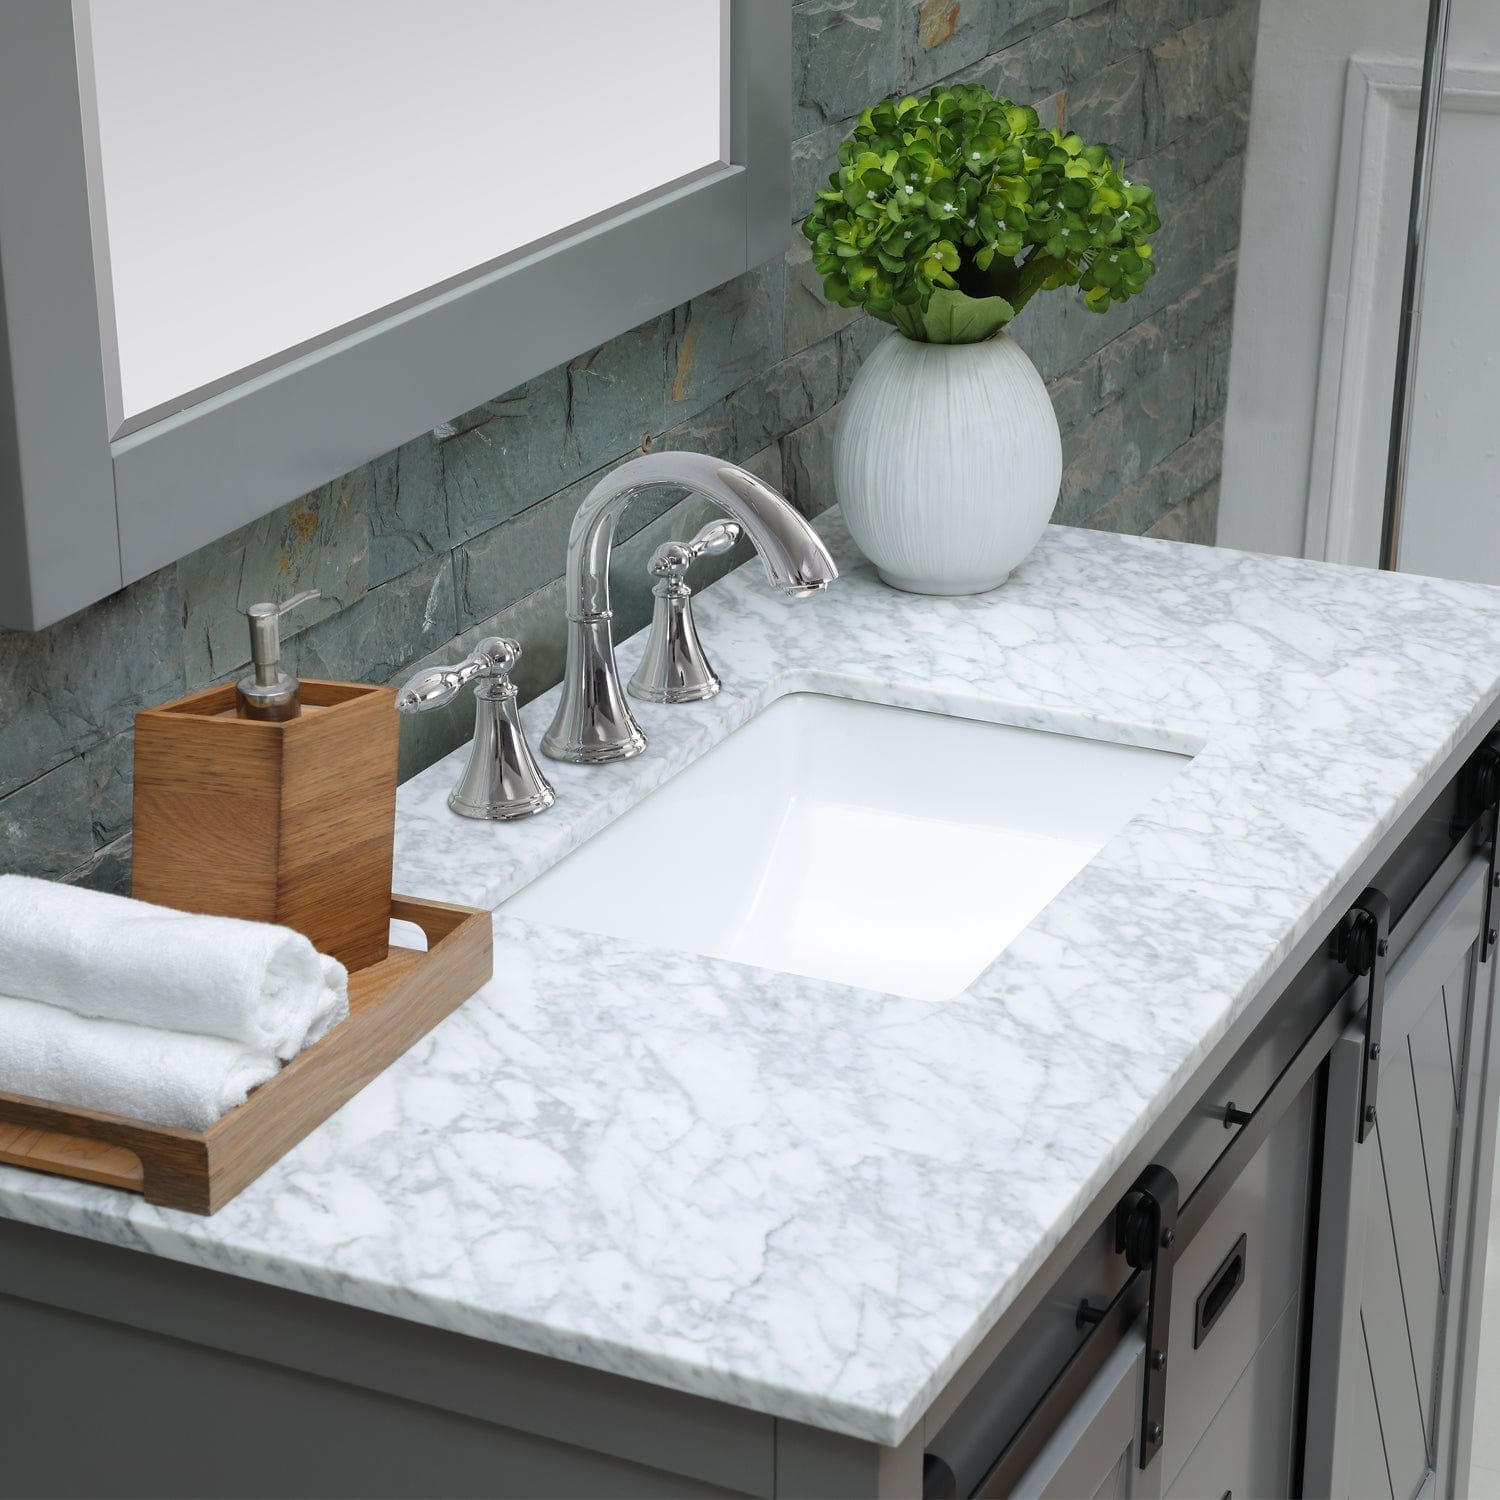 Altair Kinsley 48" Single Bathroom Vanity Set in Gray and Carrara White Marble Countertop without Mirror 536048-GR-CA-NM - Molaix631112970488Vanity536048-GR-CA-NM